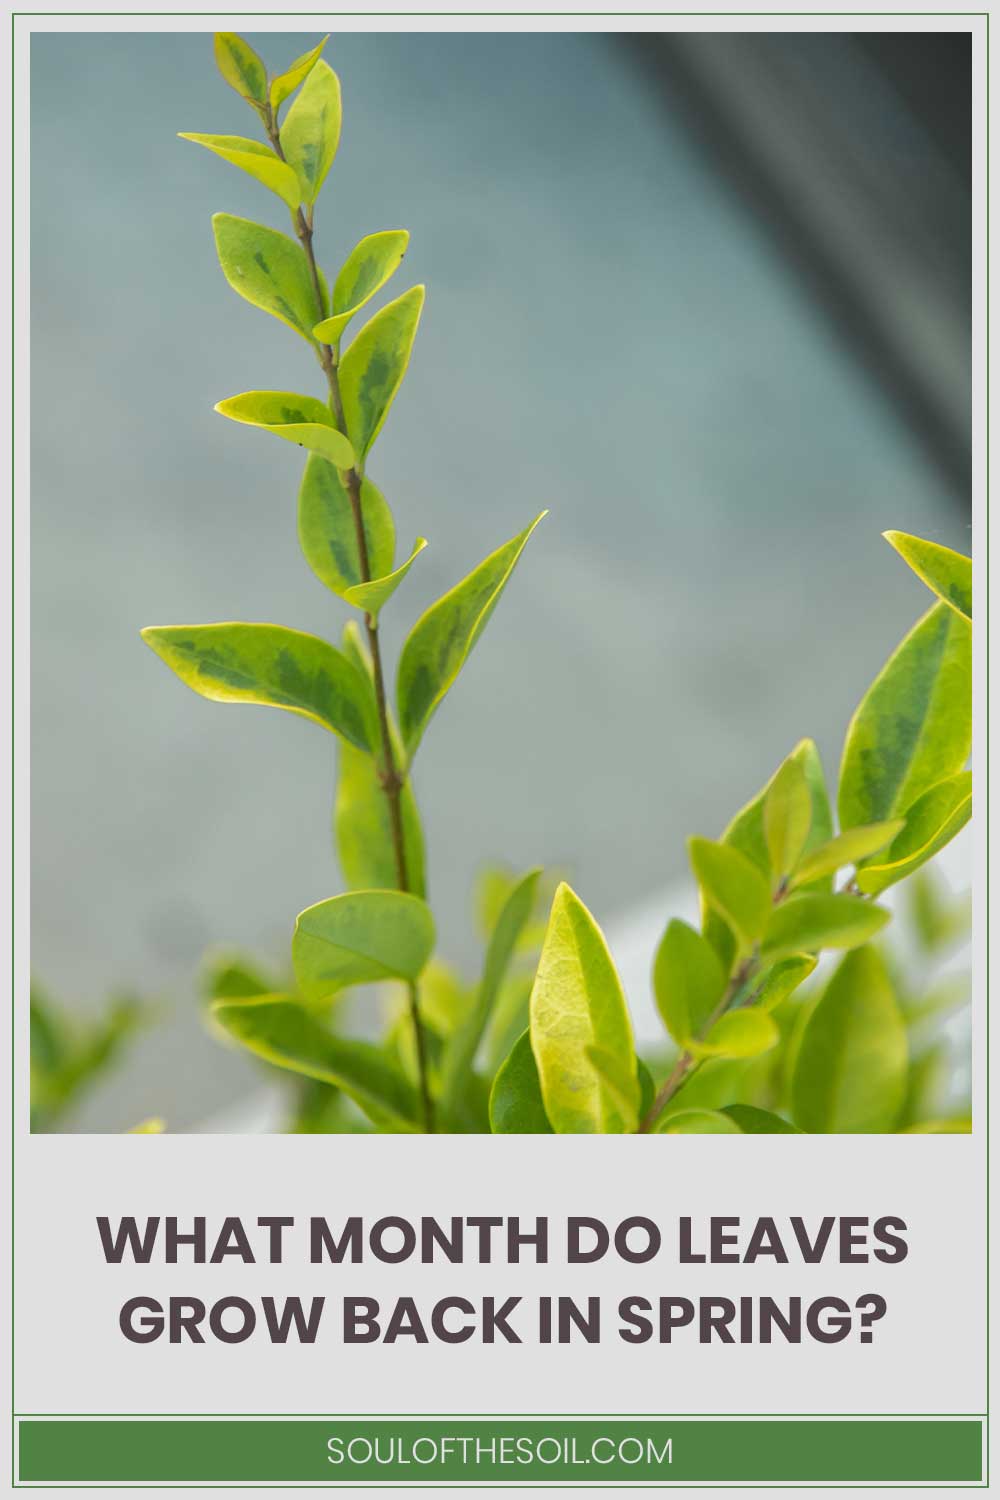 What Month Do Leaves Grow Back In Spring?